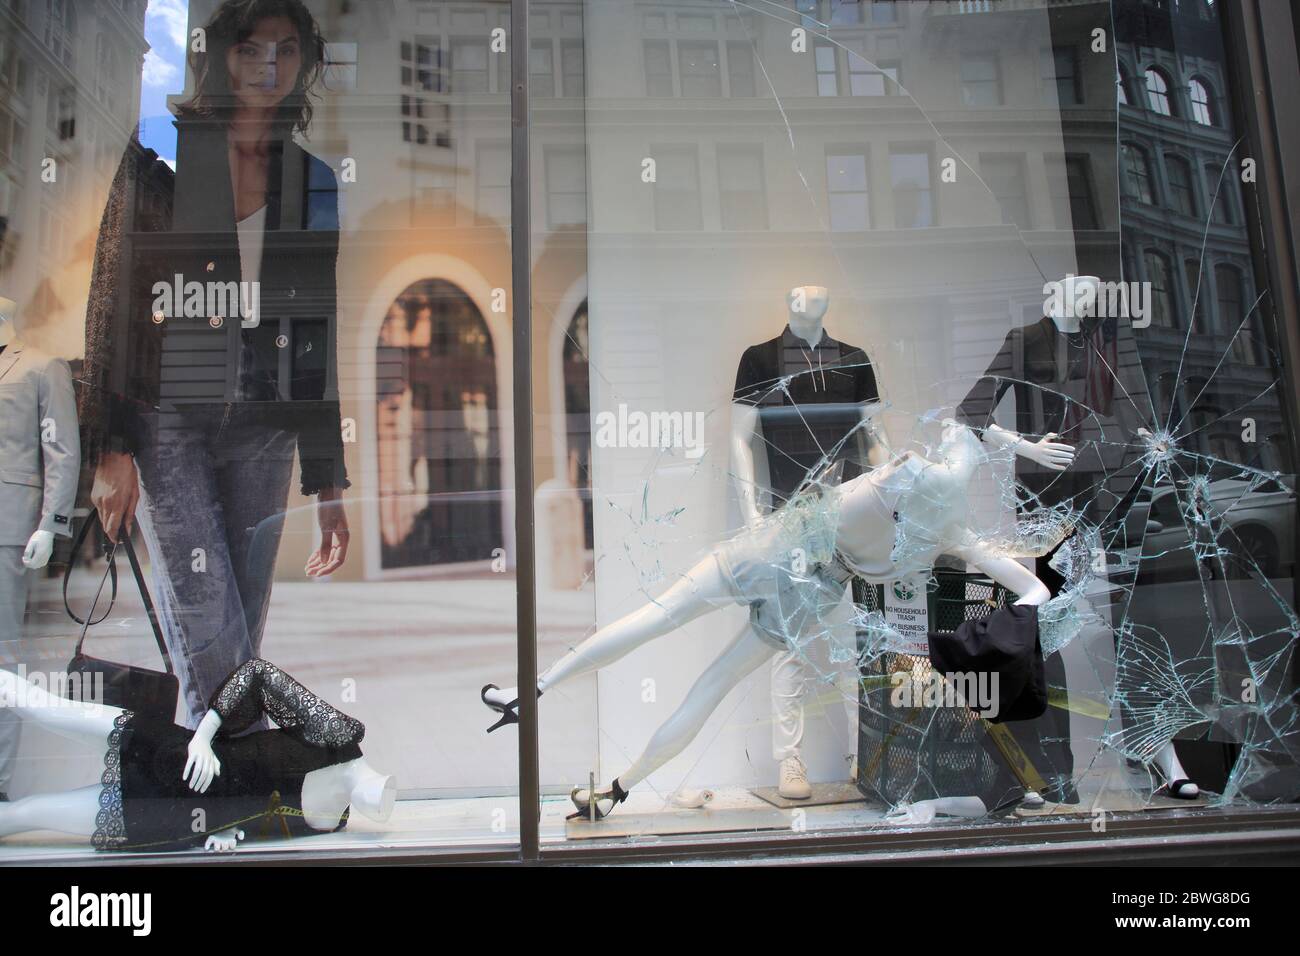 Express store windows smashed by vandals and looters after a night of protests over the death George Floyd while in custody of police Minneapolis. June 1, 2020, 5th Avenue, Flatiron District, Lower Manhattan, New York City. Stock Photo